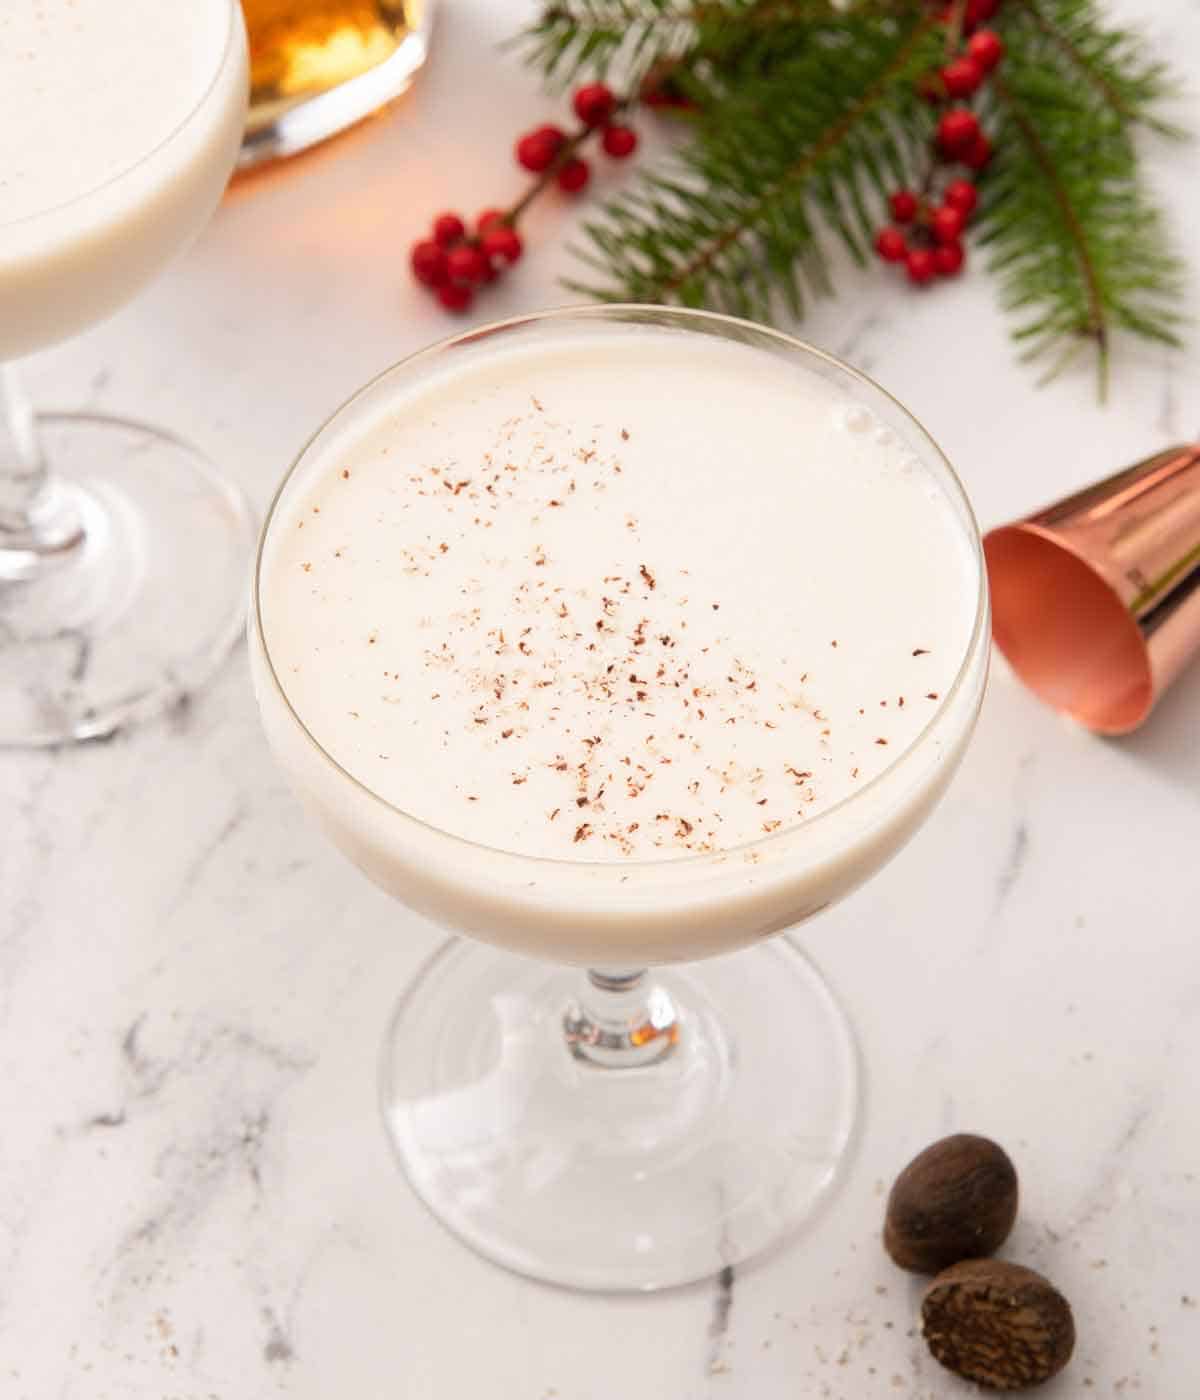 Slightly overhead view of a coupe glass with Brandy Alexander with nutmeg, jigger, and some festive garnish scattered around.